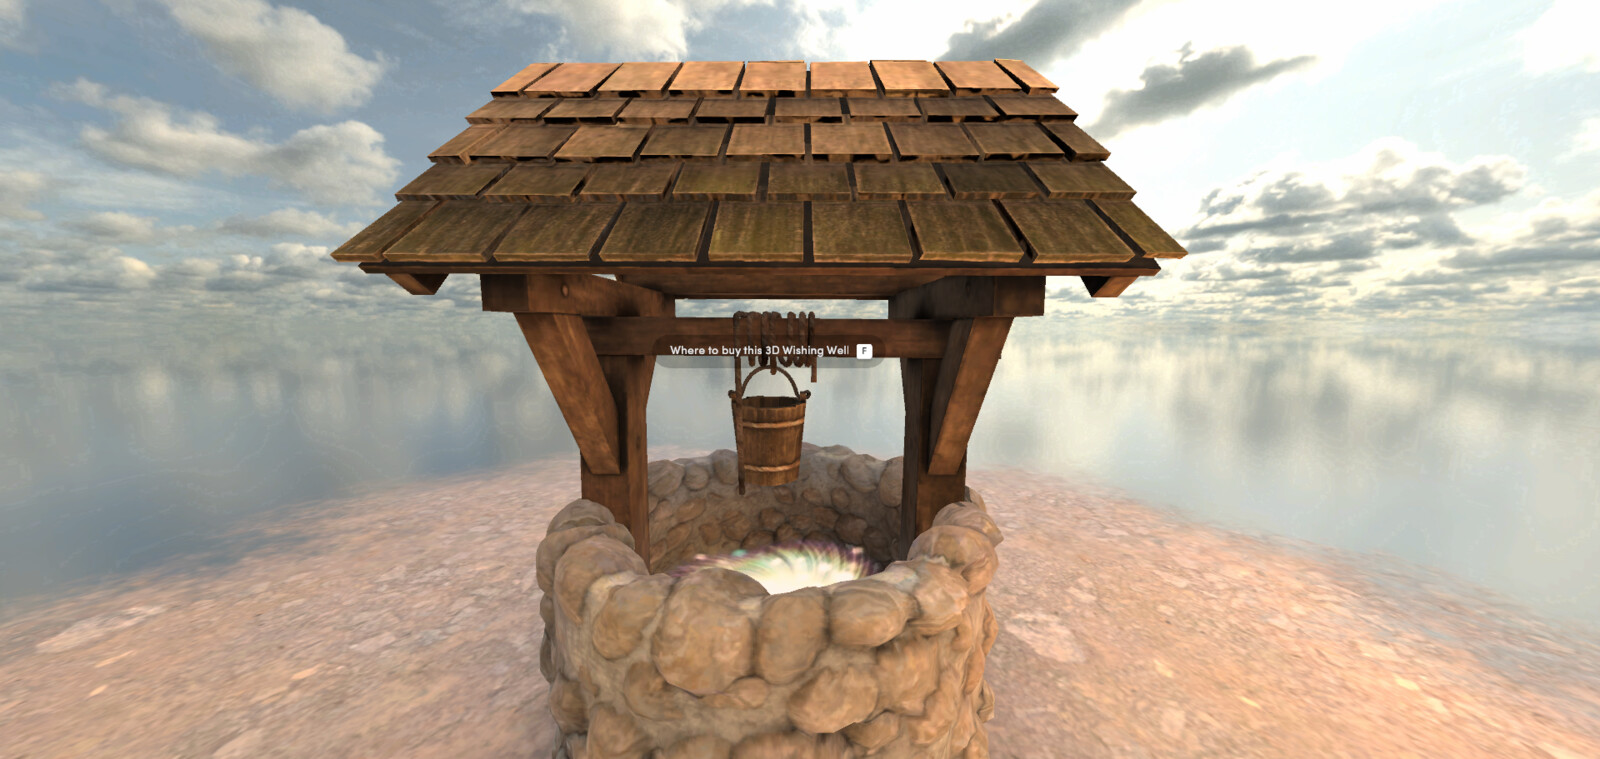 Wishing Well - Interactive first person view at https://www.spatial.io/s/Interconnect3D-Wishing-Well-65c008324f5748f39bd0dbda